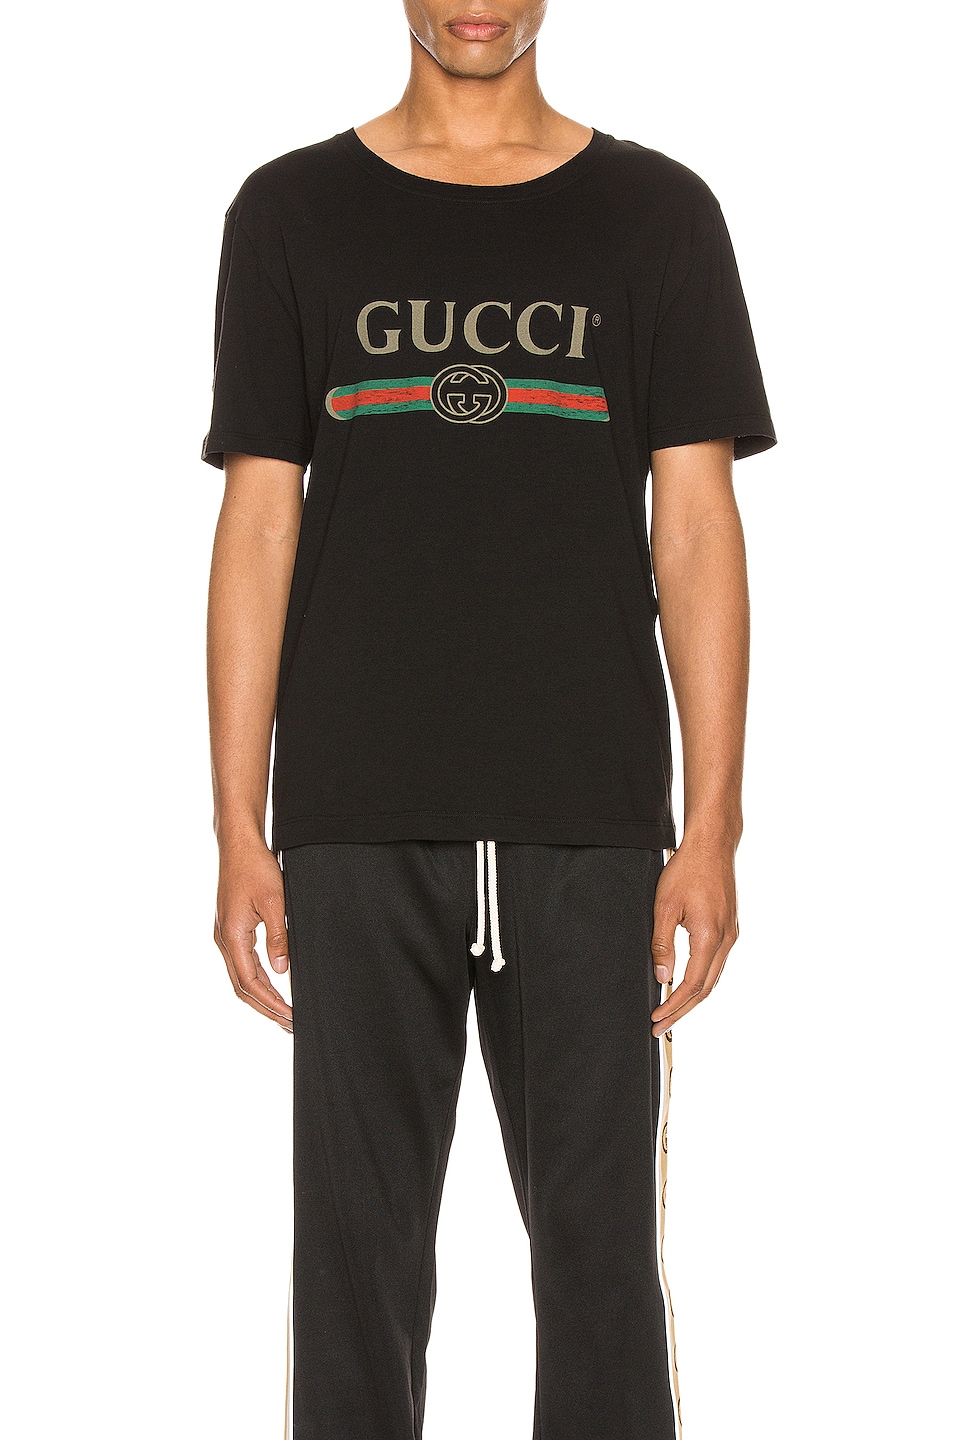 Gucci Logo Oversize Washed Tee in Black & Green & Red & Crop | FWRD